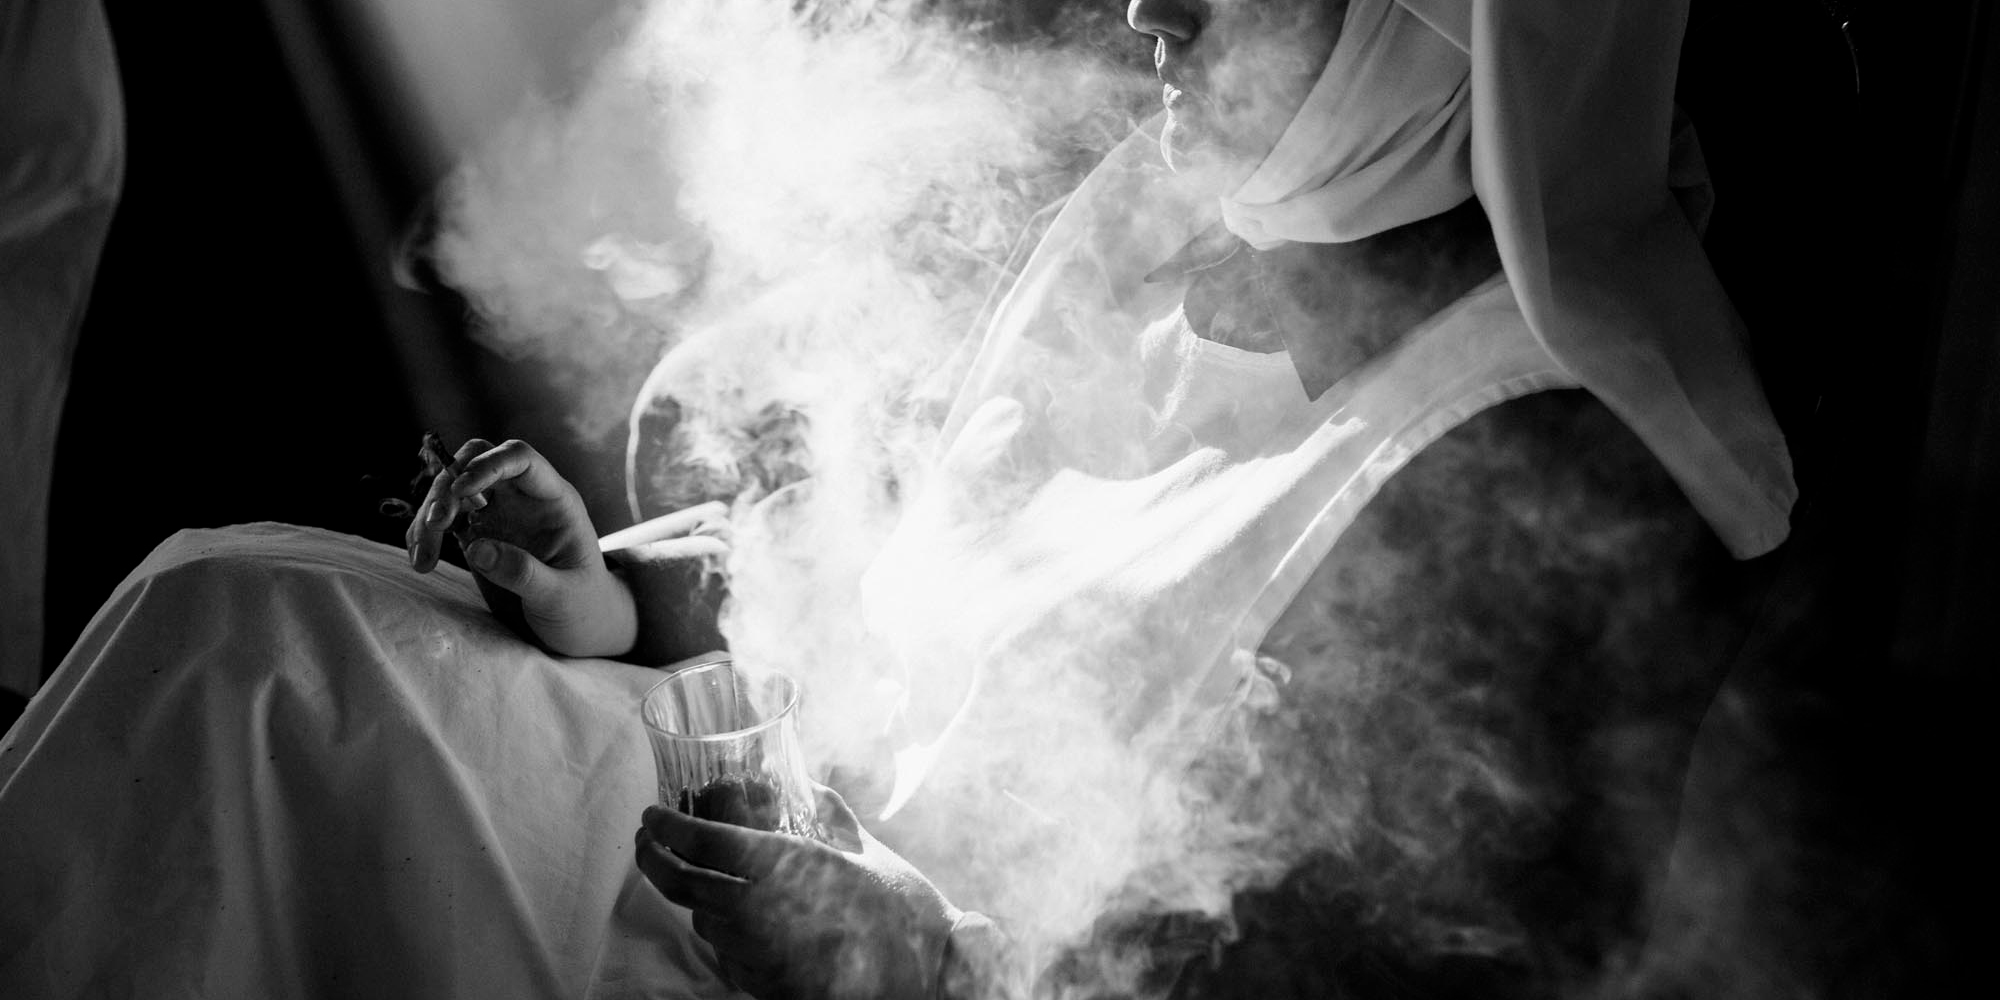 Meet the Weed Nuns – Our Ladies of Perpetual High